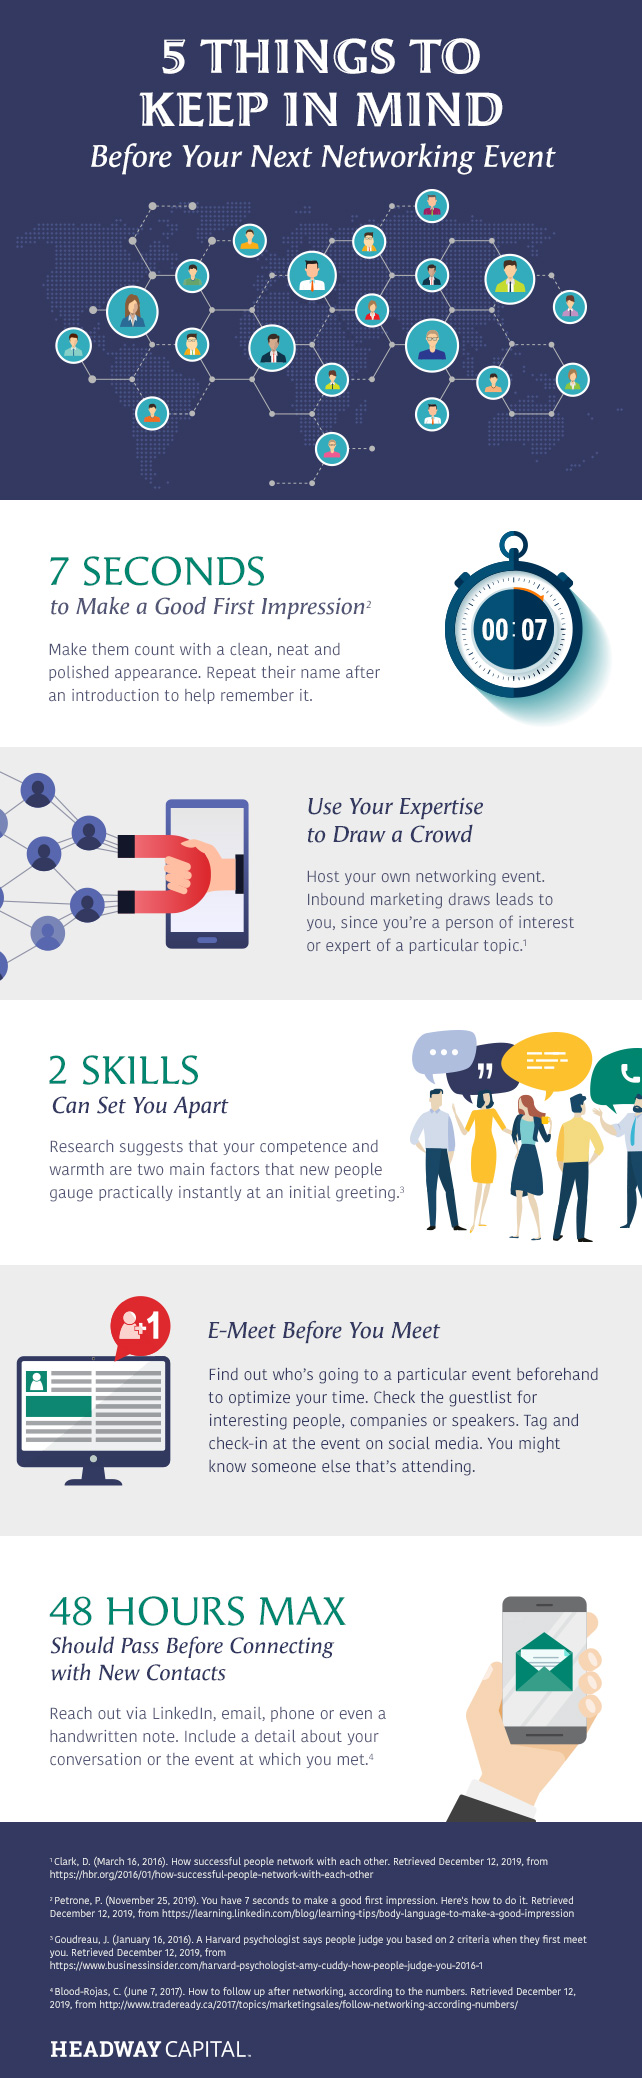 5 Things to Keep in Mind Before Your Next Networking Event Infographic